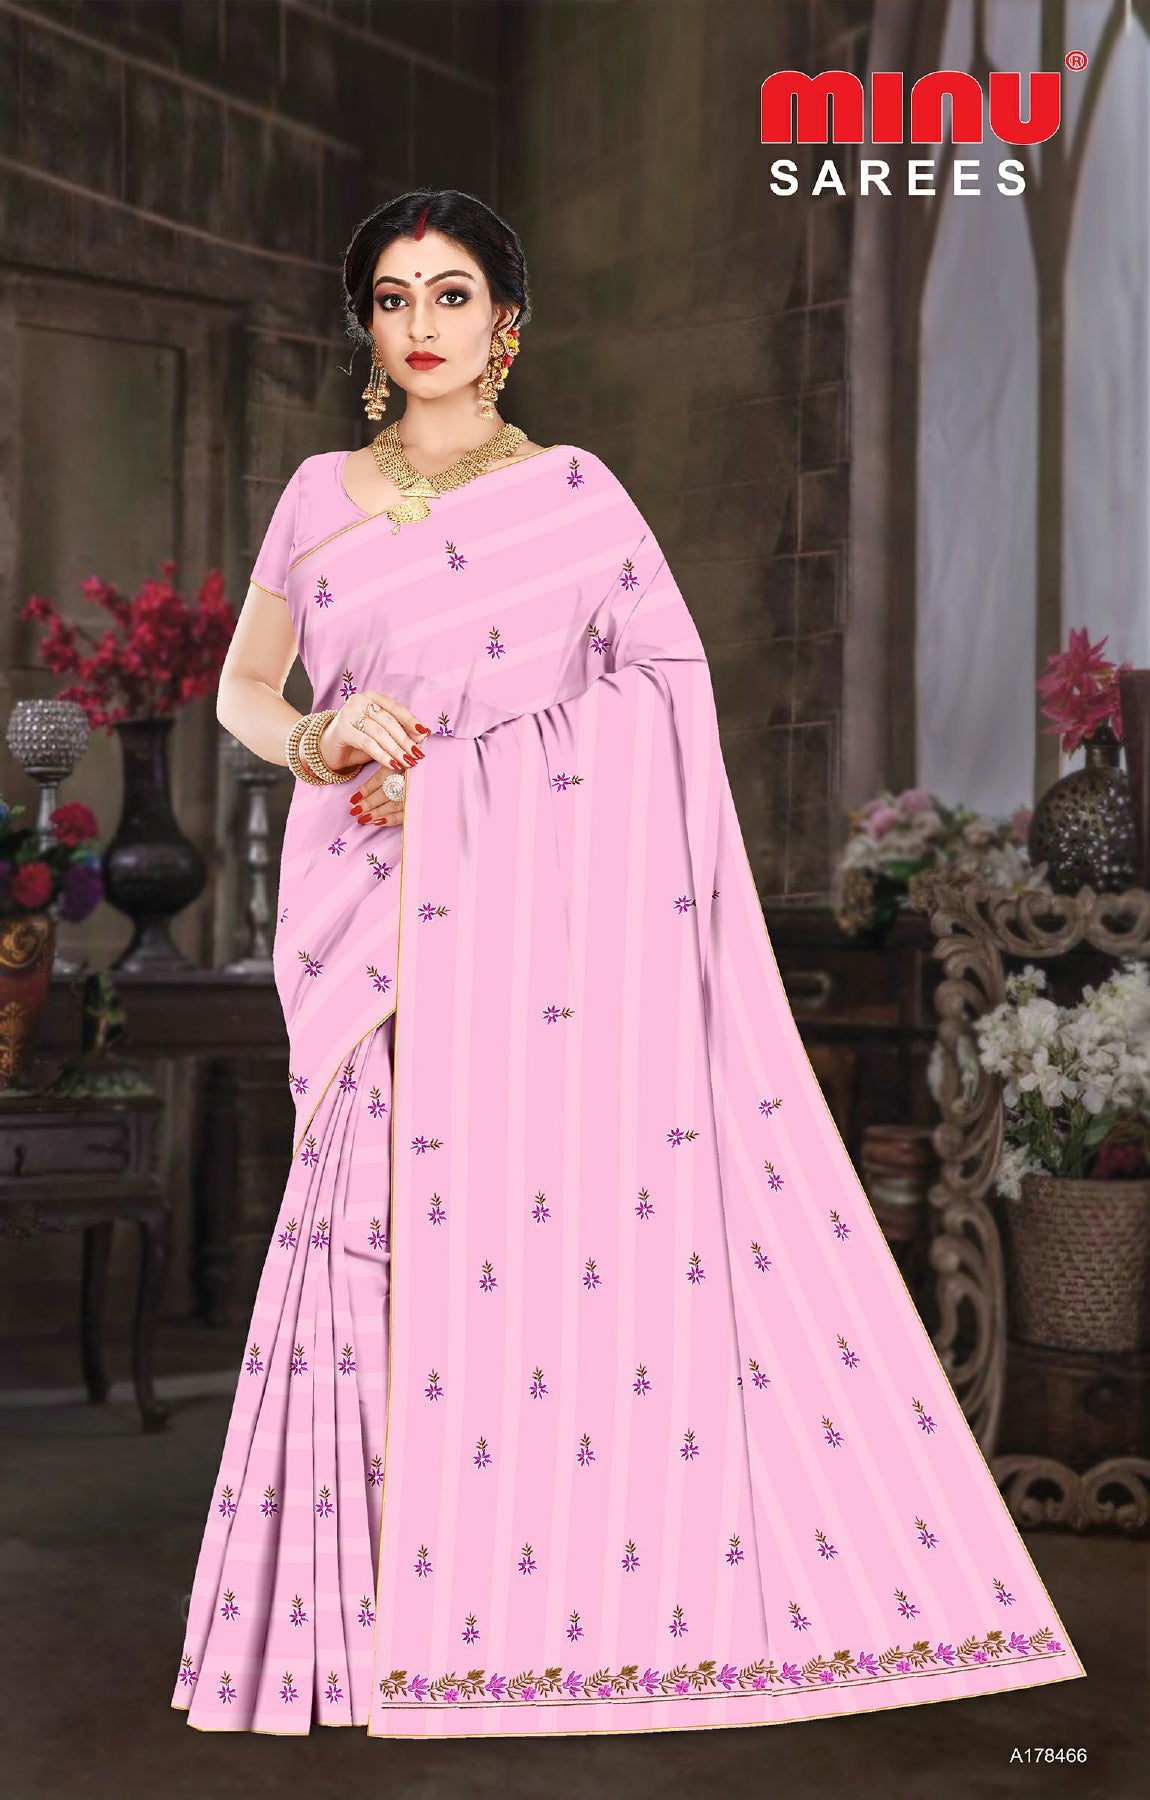 embroidered sarees wholesale in Kolkata for traditional events 